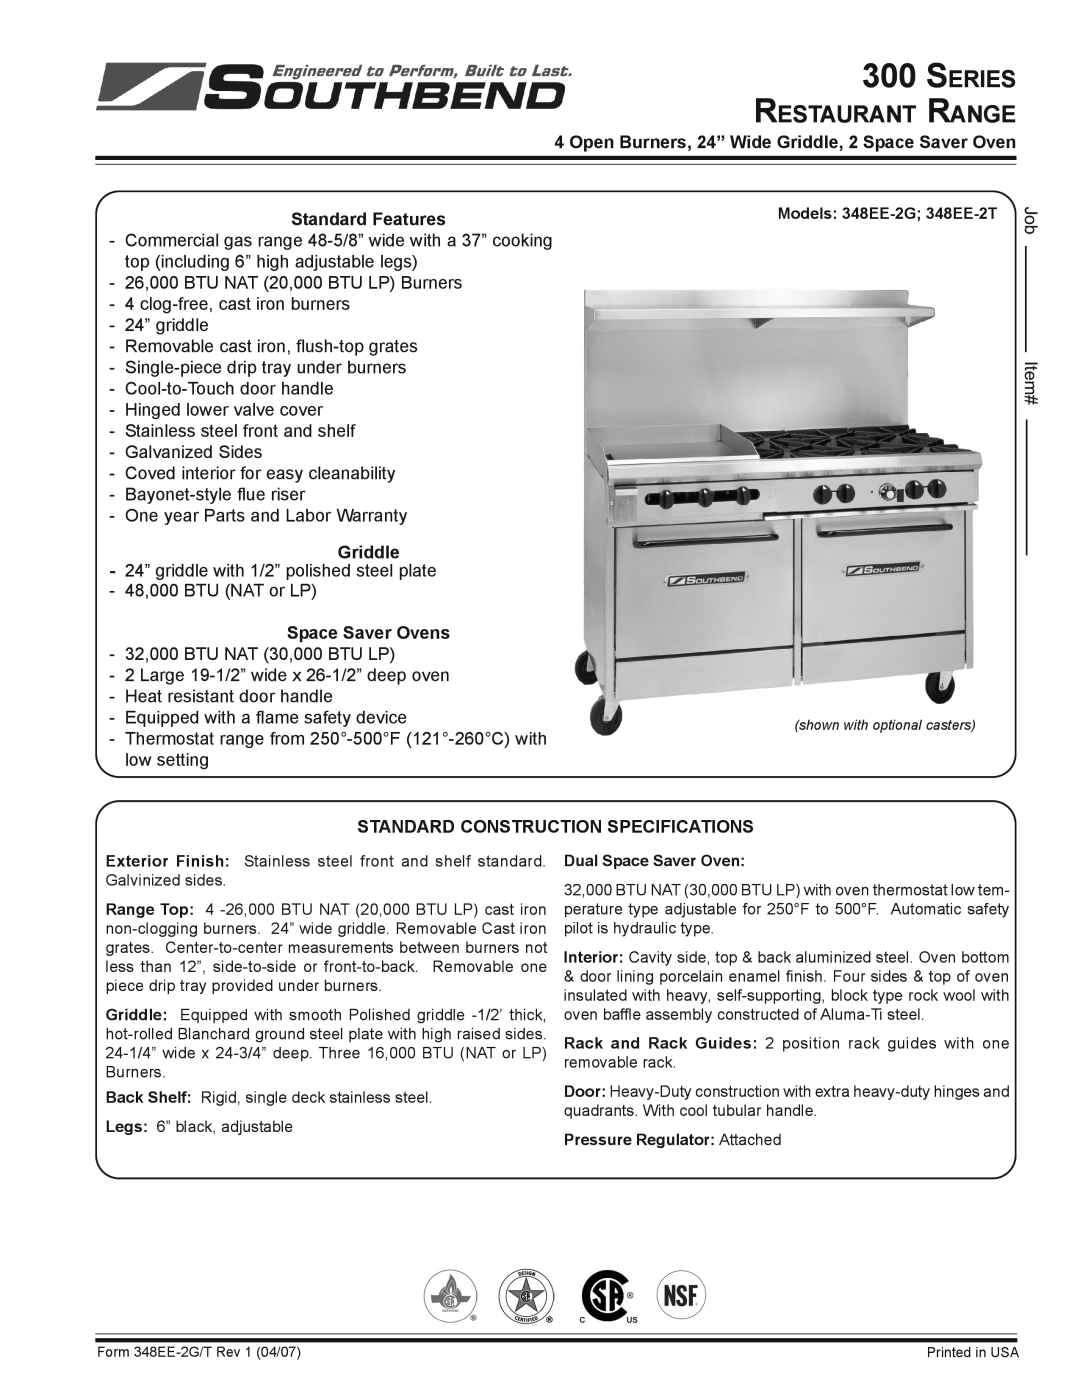 Southbend 300 Series specifications Standard Features, Griddle, Space Saver Ovens, Standard Construction Specifications 